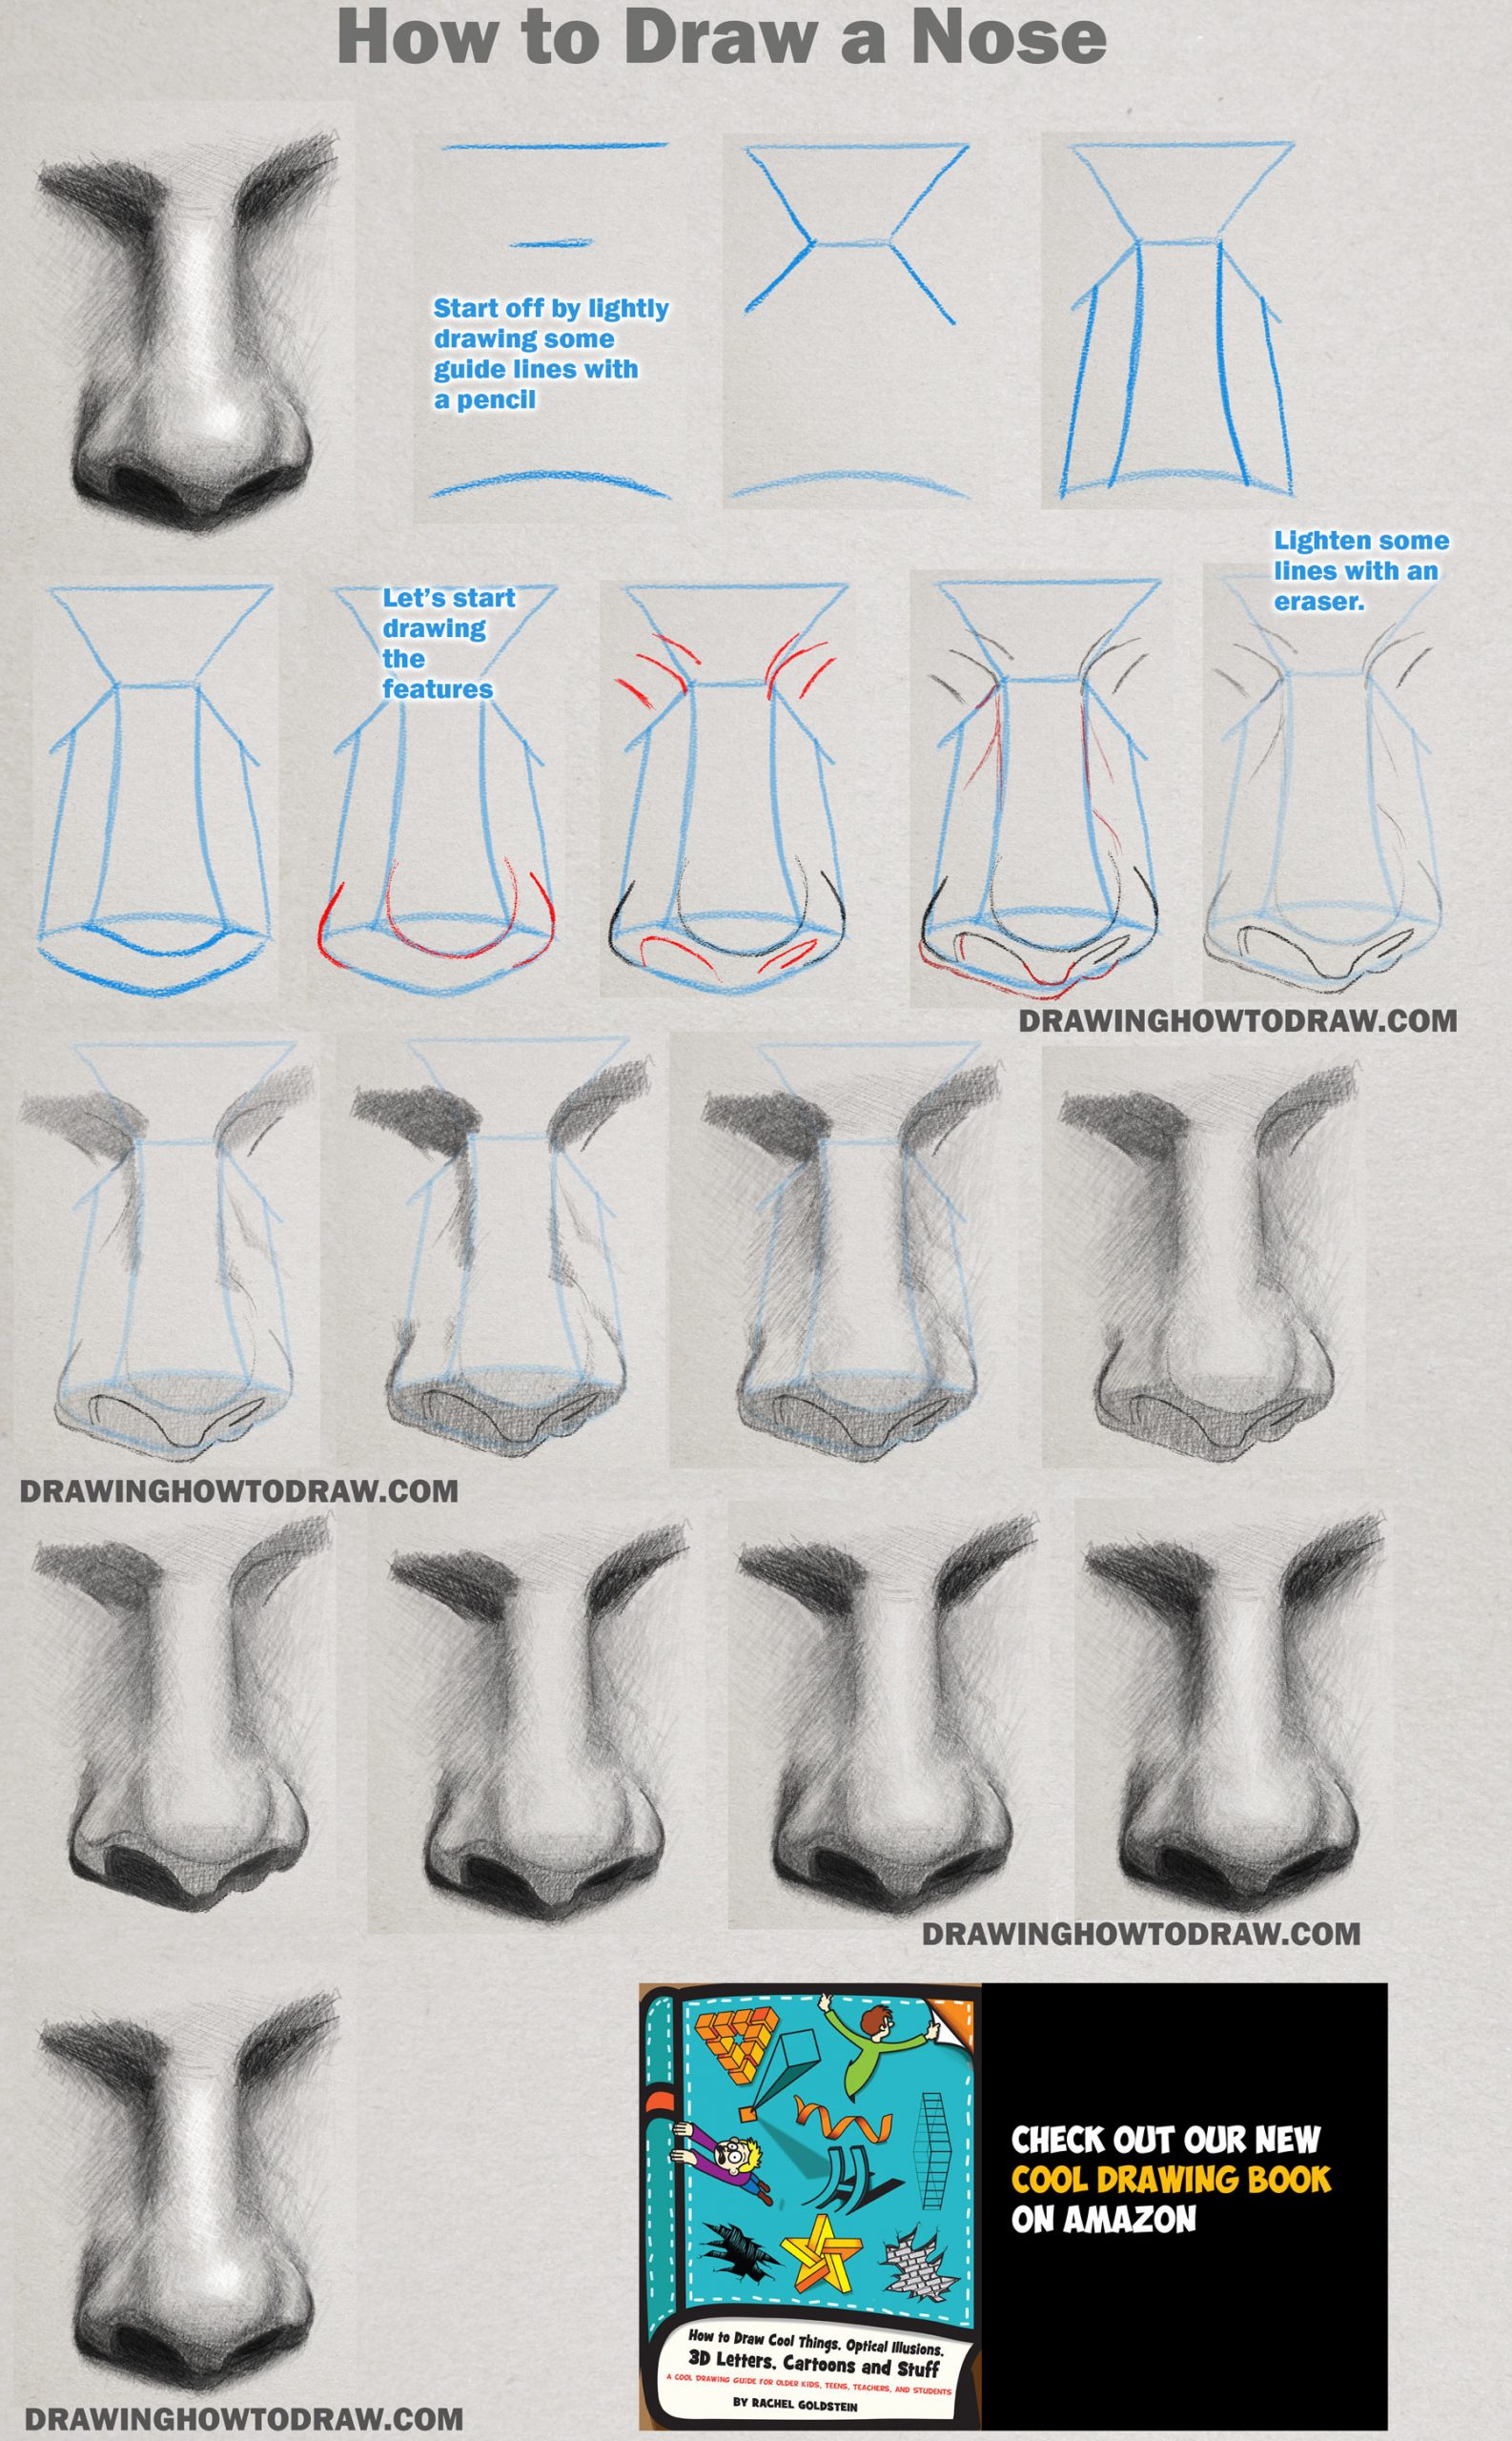 How to Draw and Shade a Realistic Nose in Pencil or Graphite Easy Step